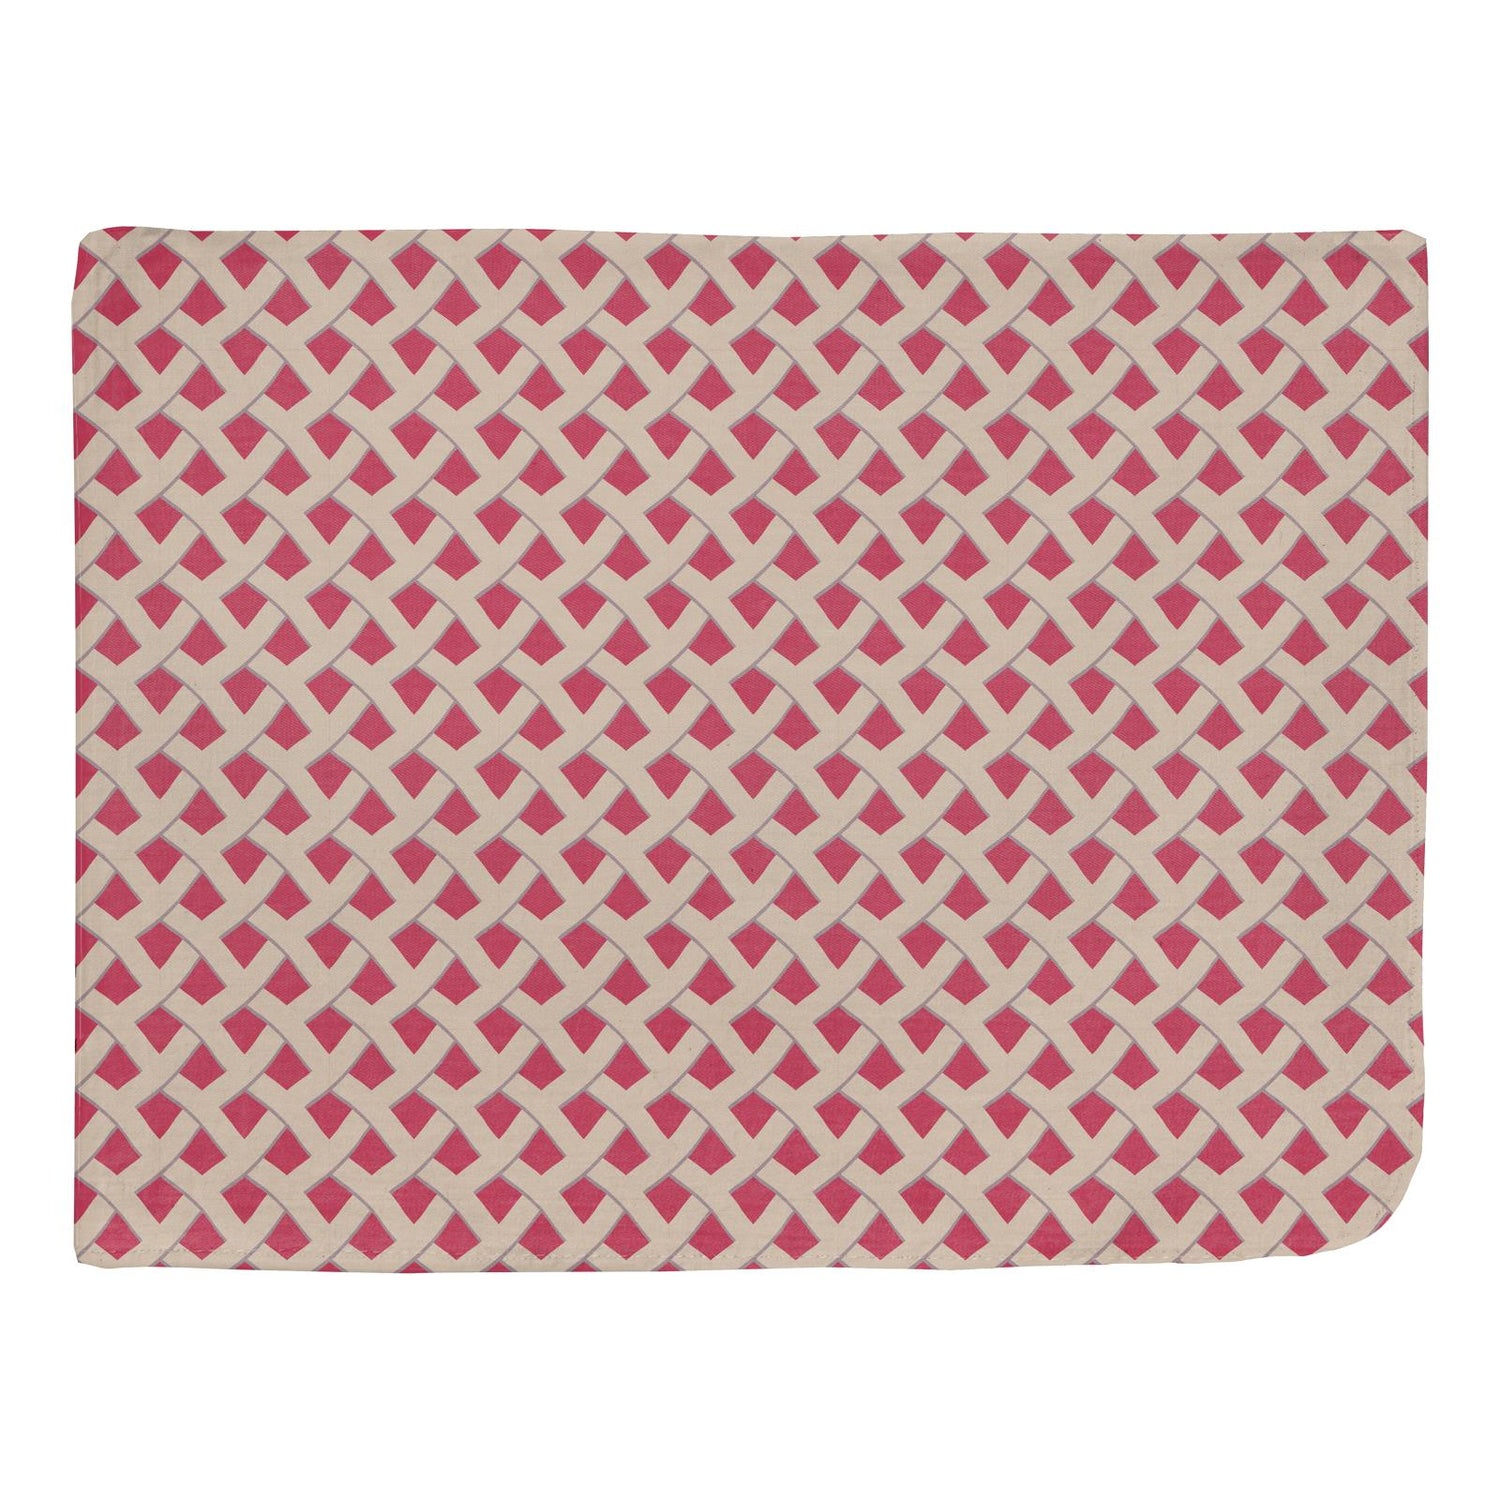 Print Woven Toddler Play Blanket in Summer Berry Pie